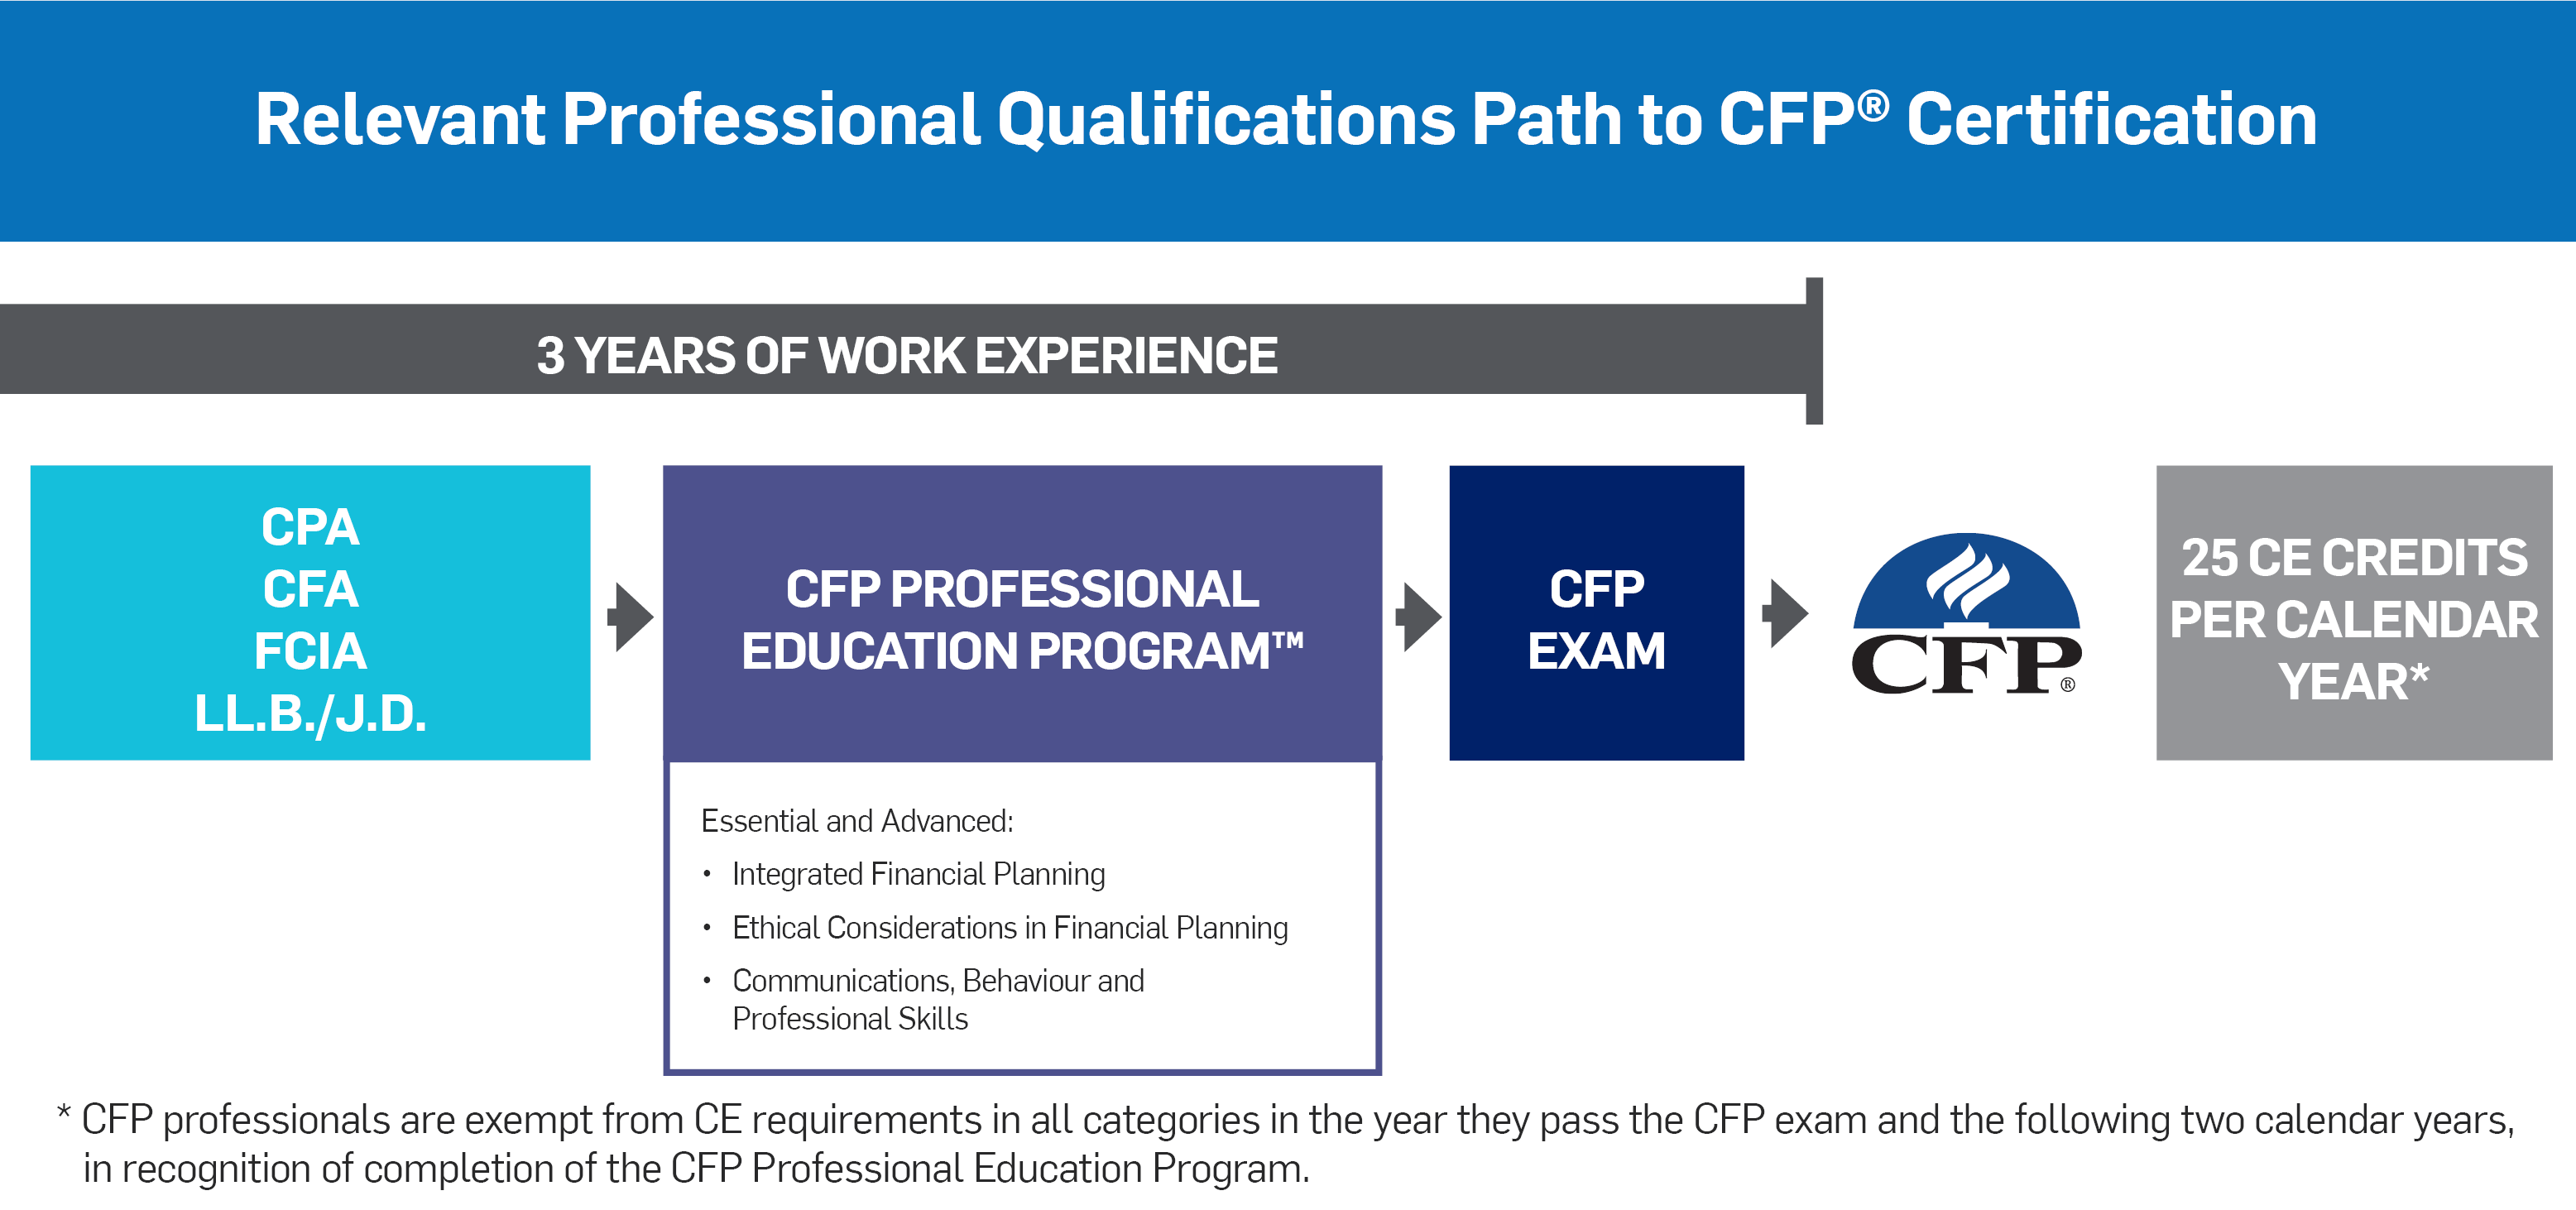 Relevant Professional Qualifications Path